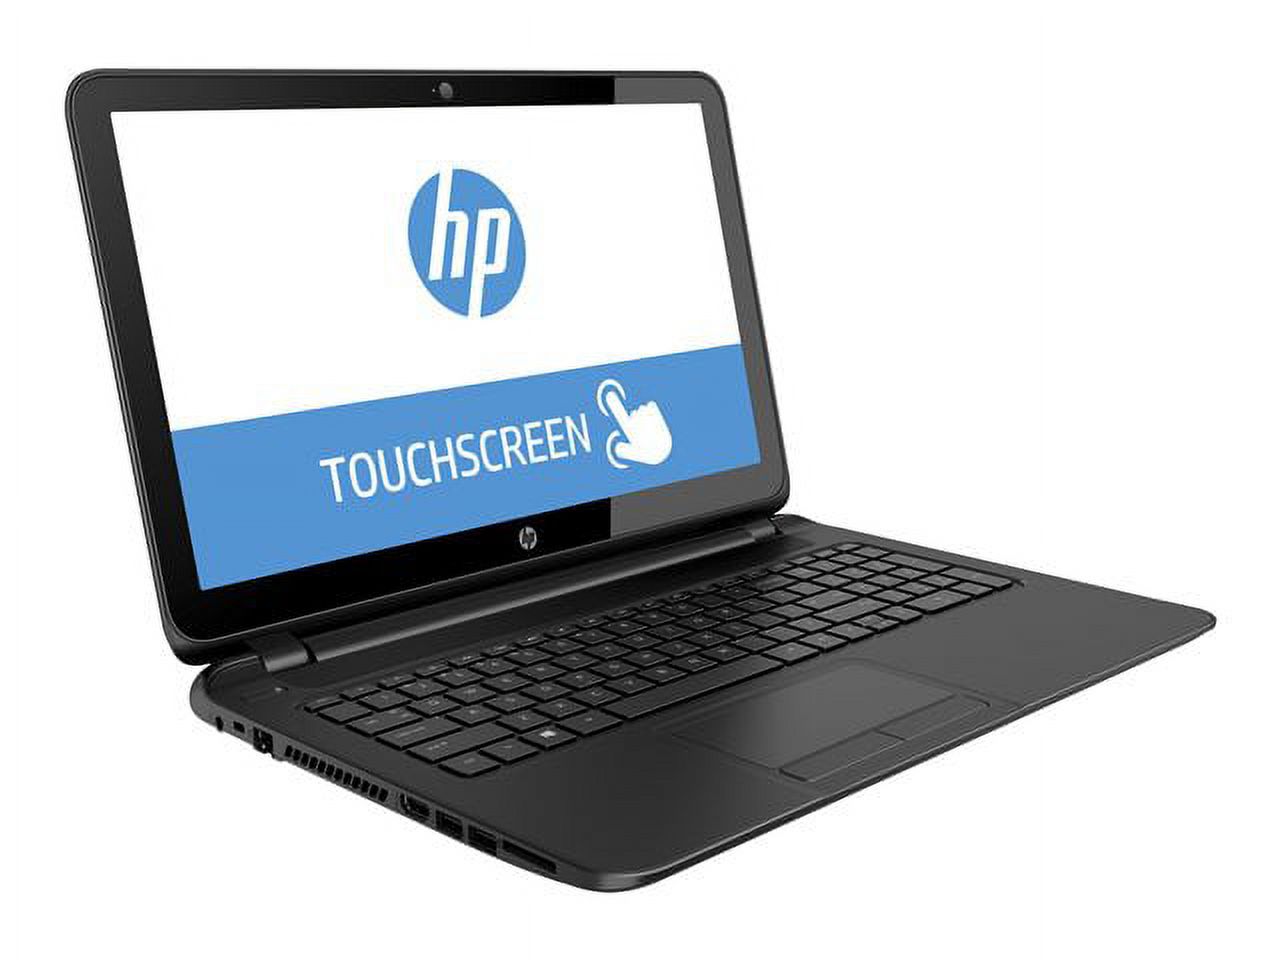 HP Black Licorice 15.6" 15-F387WM Laptop PC with AMD A8-7410 Processor, 4GB Memory, touch screen, 500GB Hard Drive and Windows 10 Home - image 2 of 41